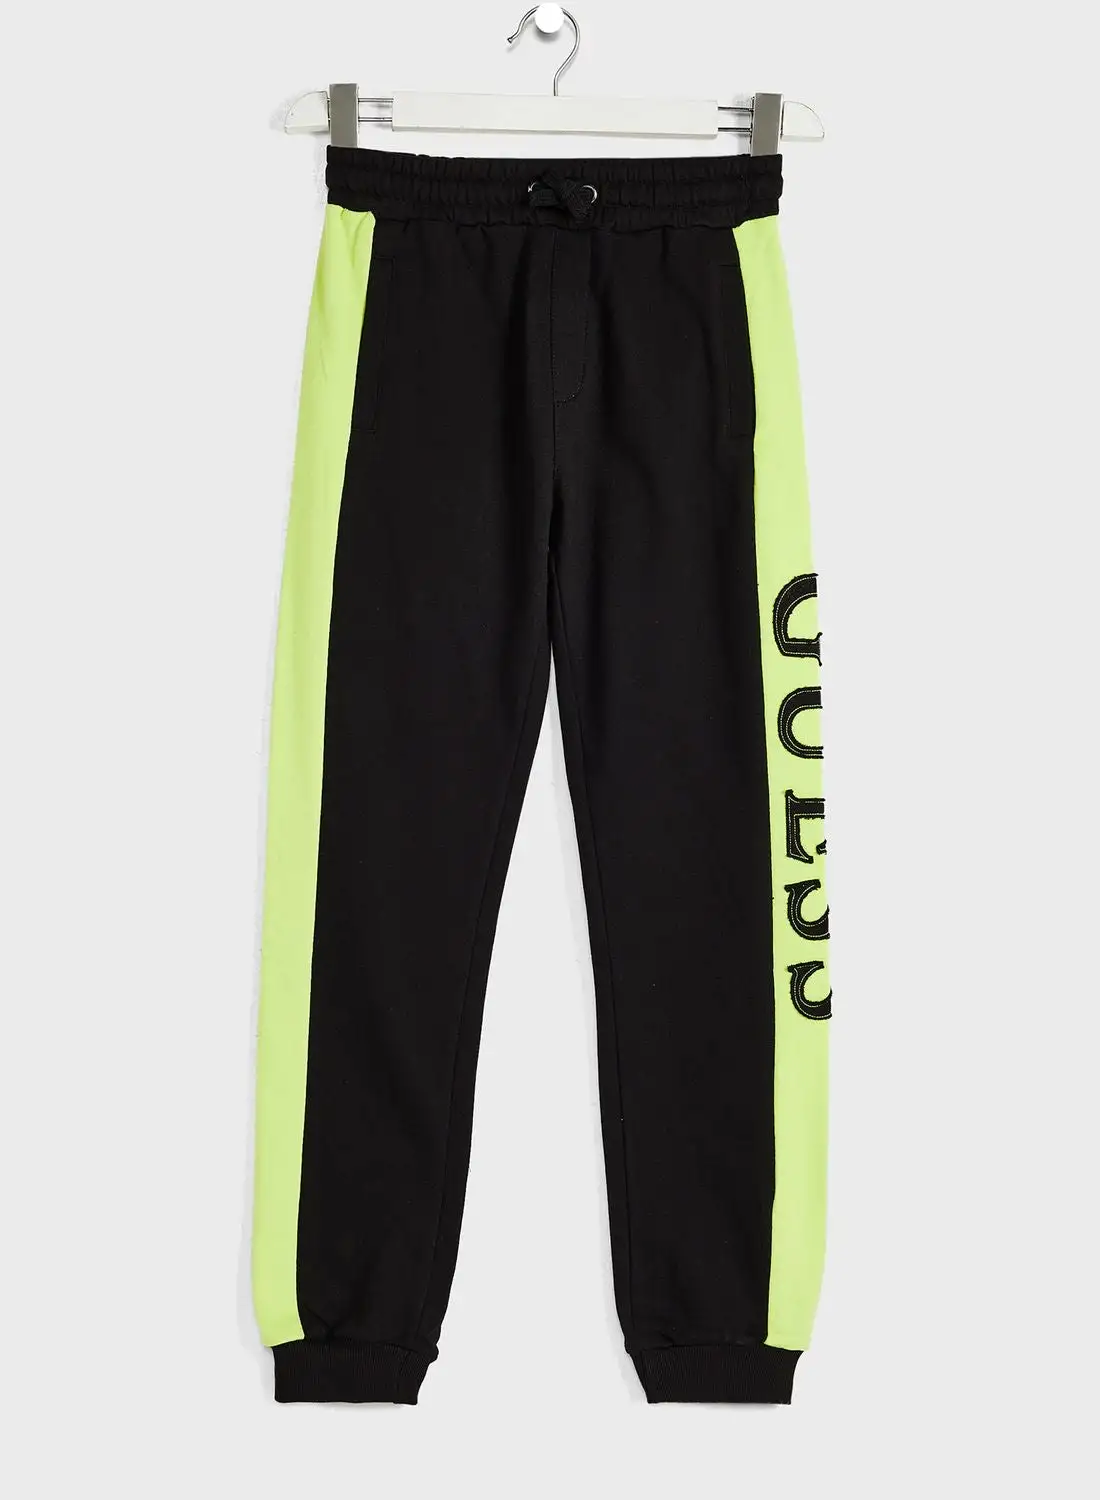 GUESS Youth Essential Sweatpants